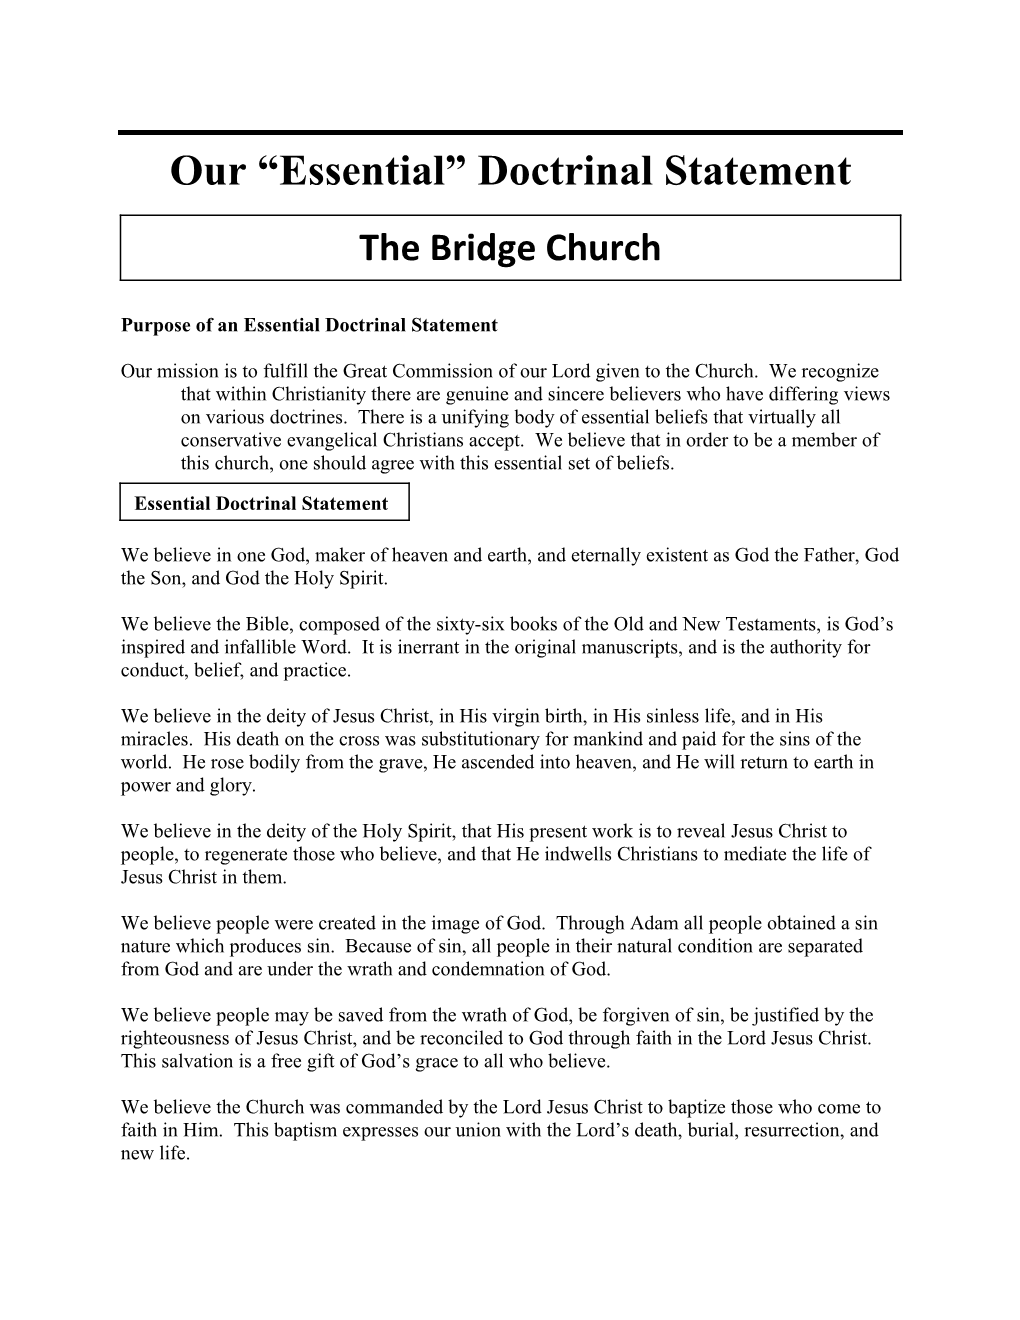 Our Essential Doctrinal Statement